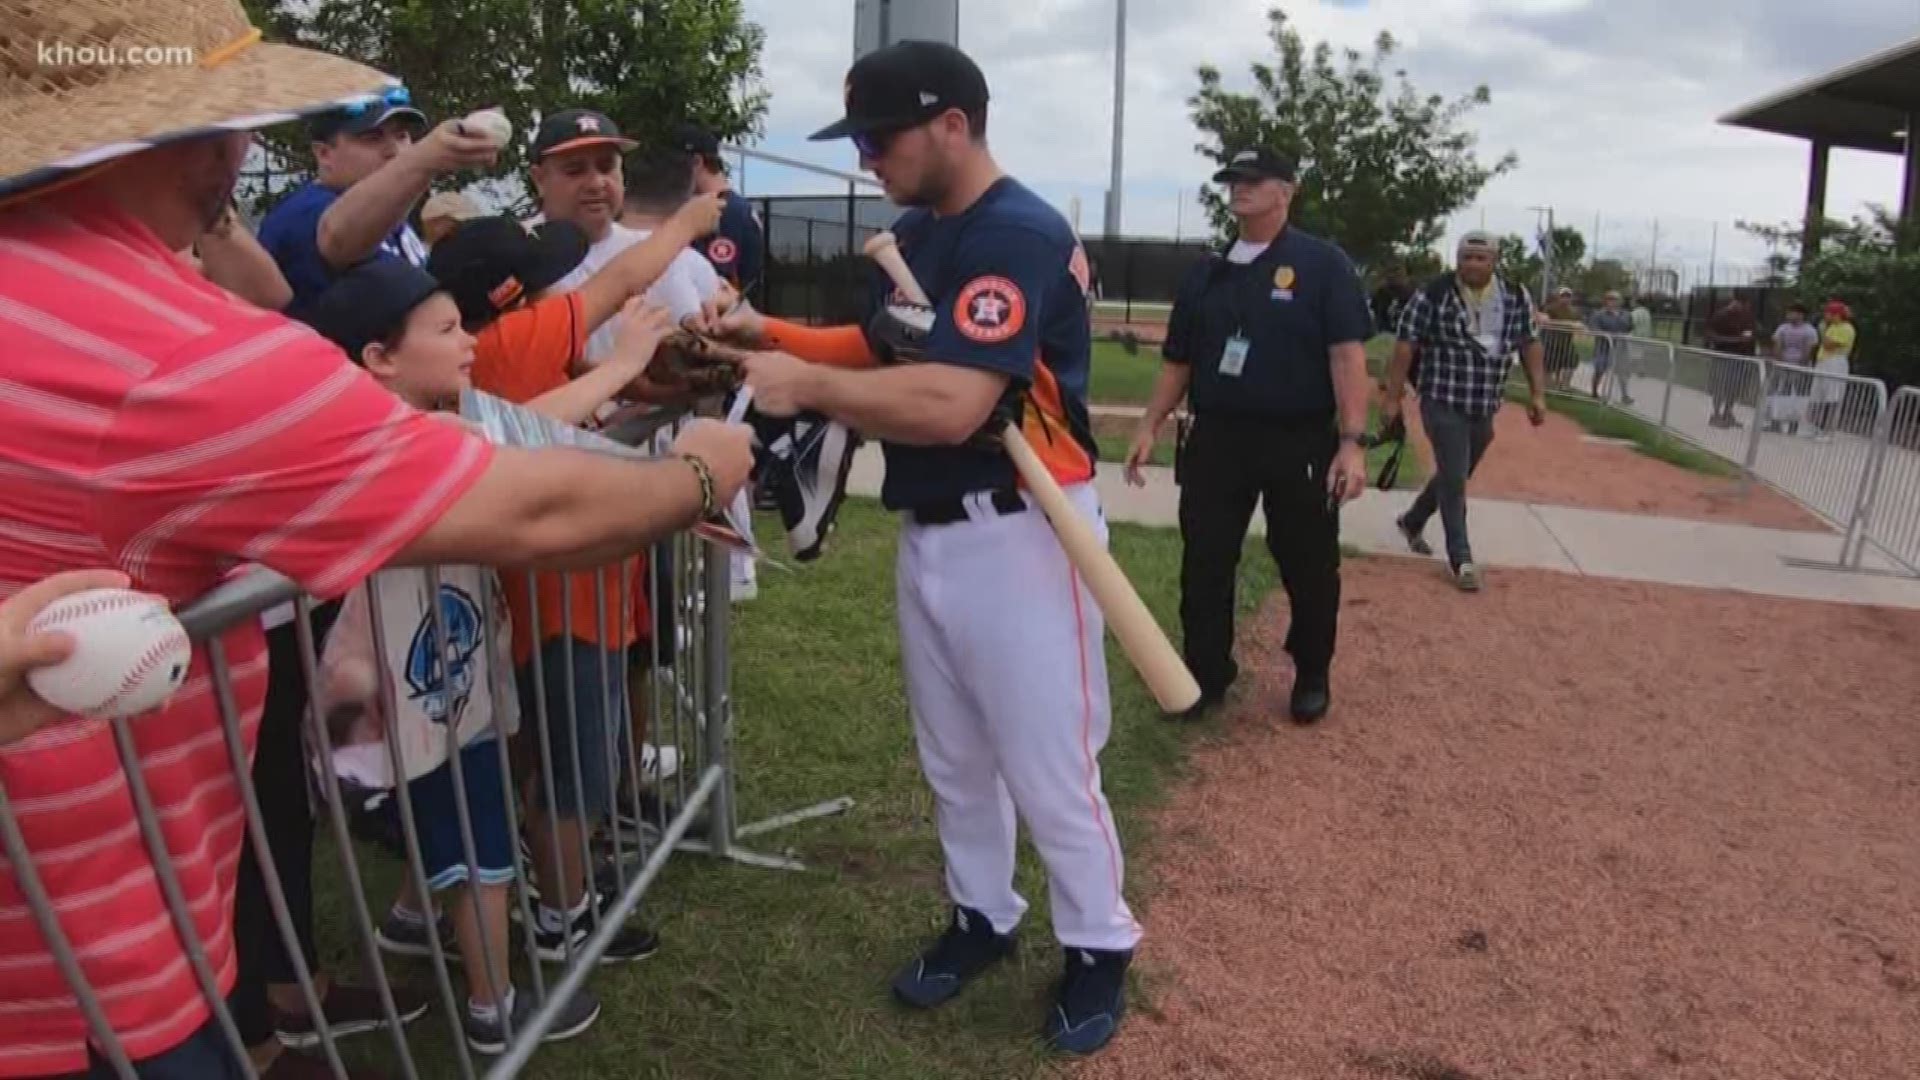 Sign of the Times? Fans Who Heckled Astros for Sign-Stealing Had